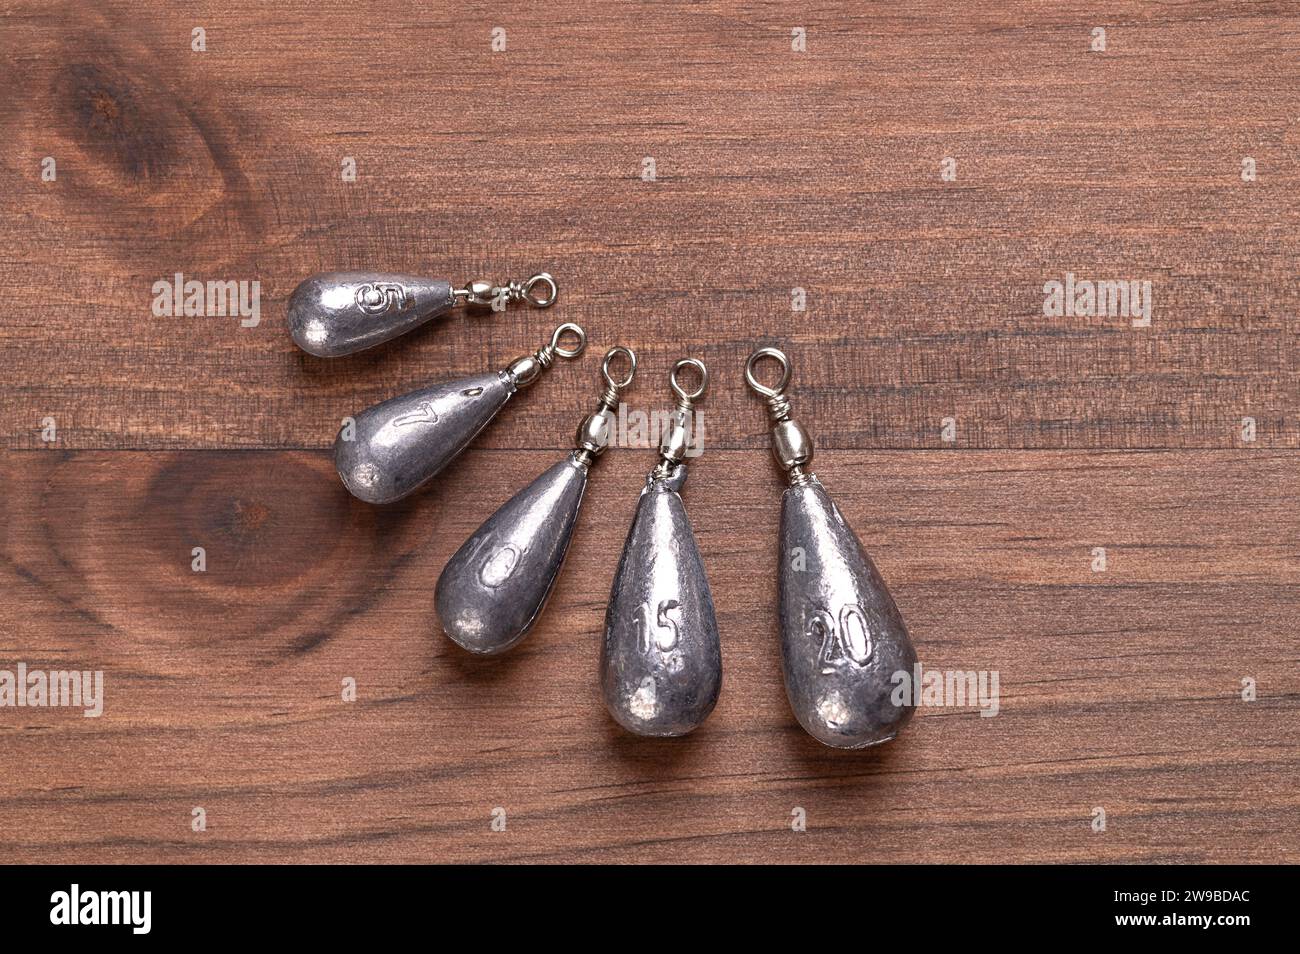 Fishing pear leads, also called sinkers, on a dark brown wood board, from above. Six different pear-shaped lead weights for fishing. Stock Photo